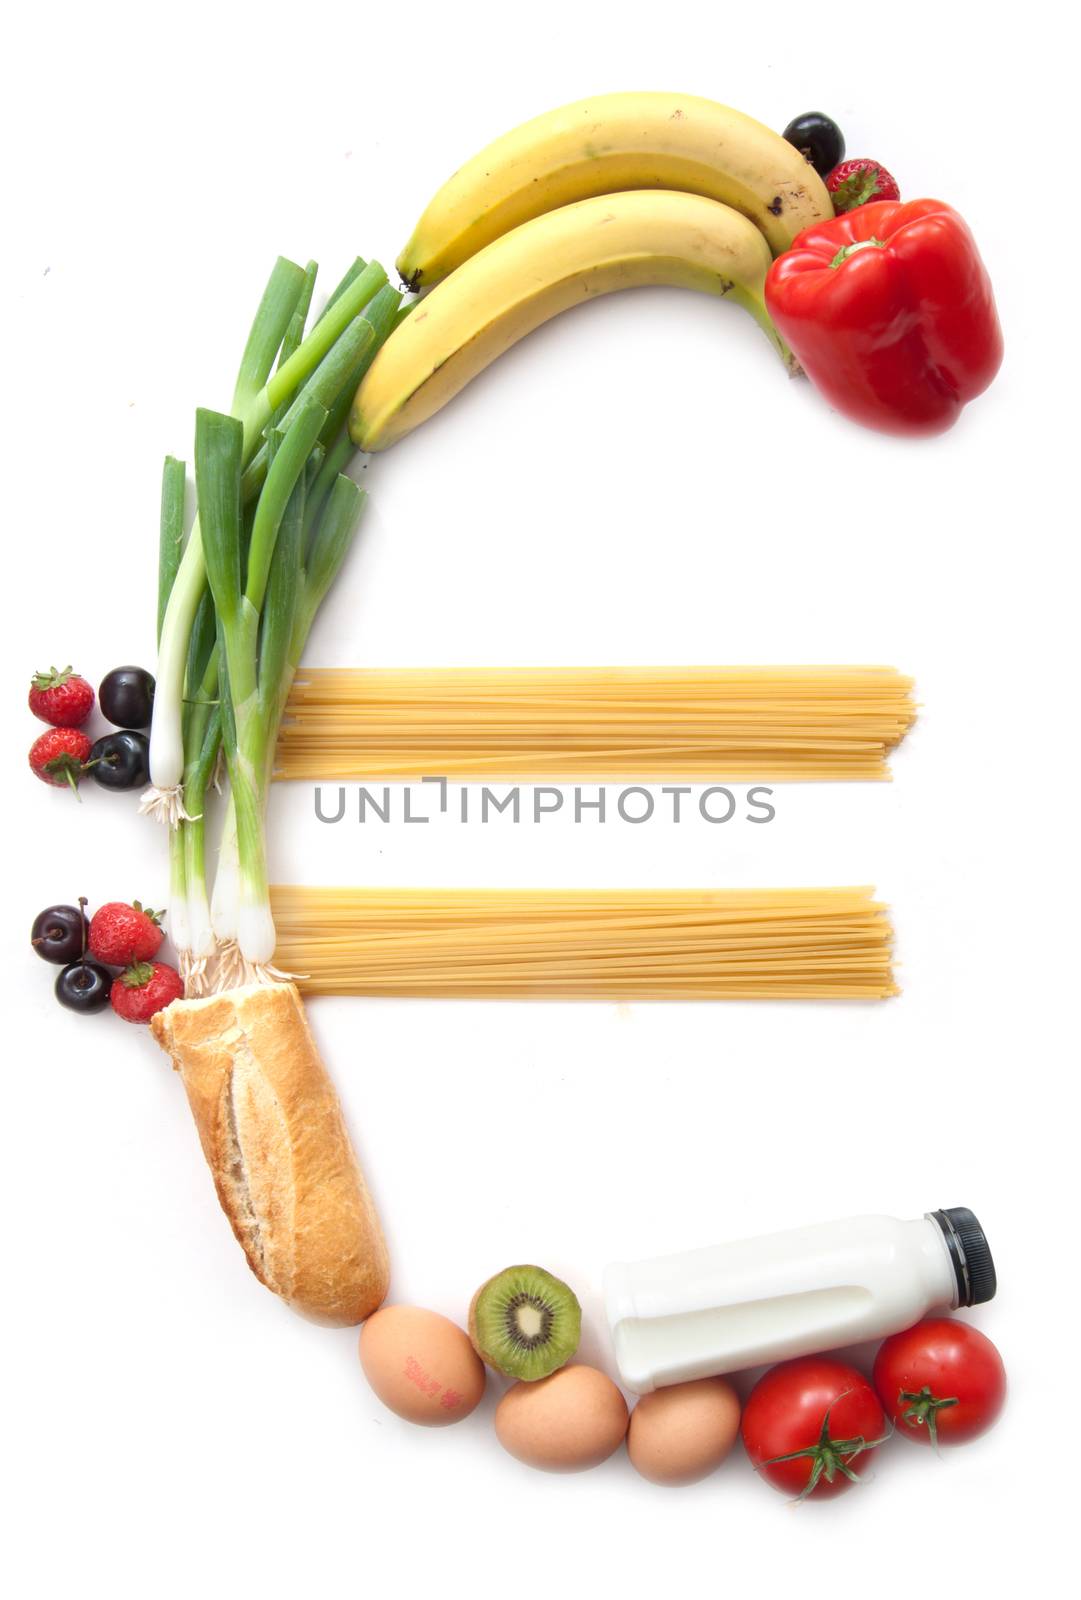 Euro currency sign made from food groceries over a white background 